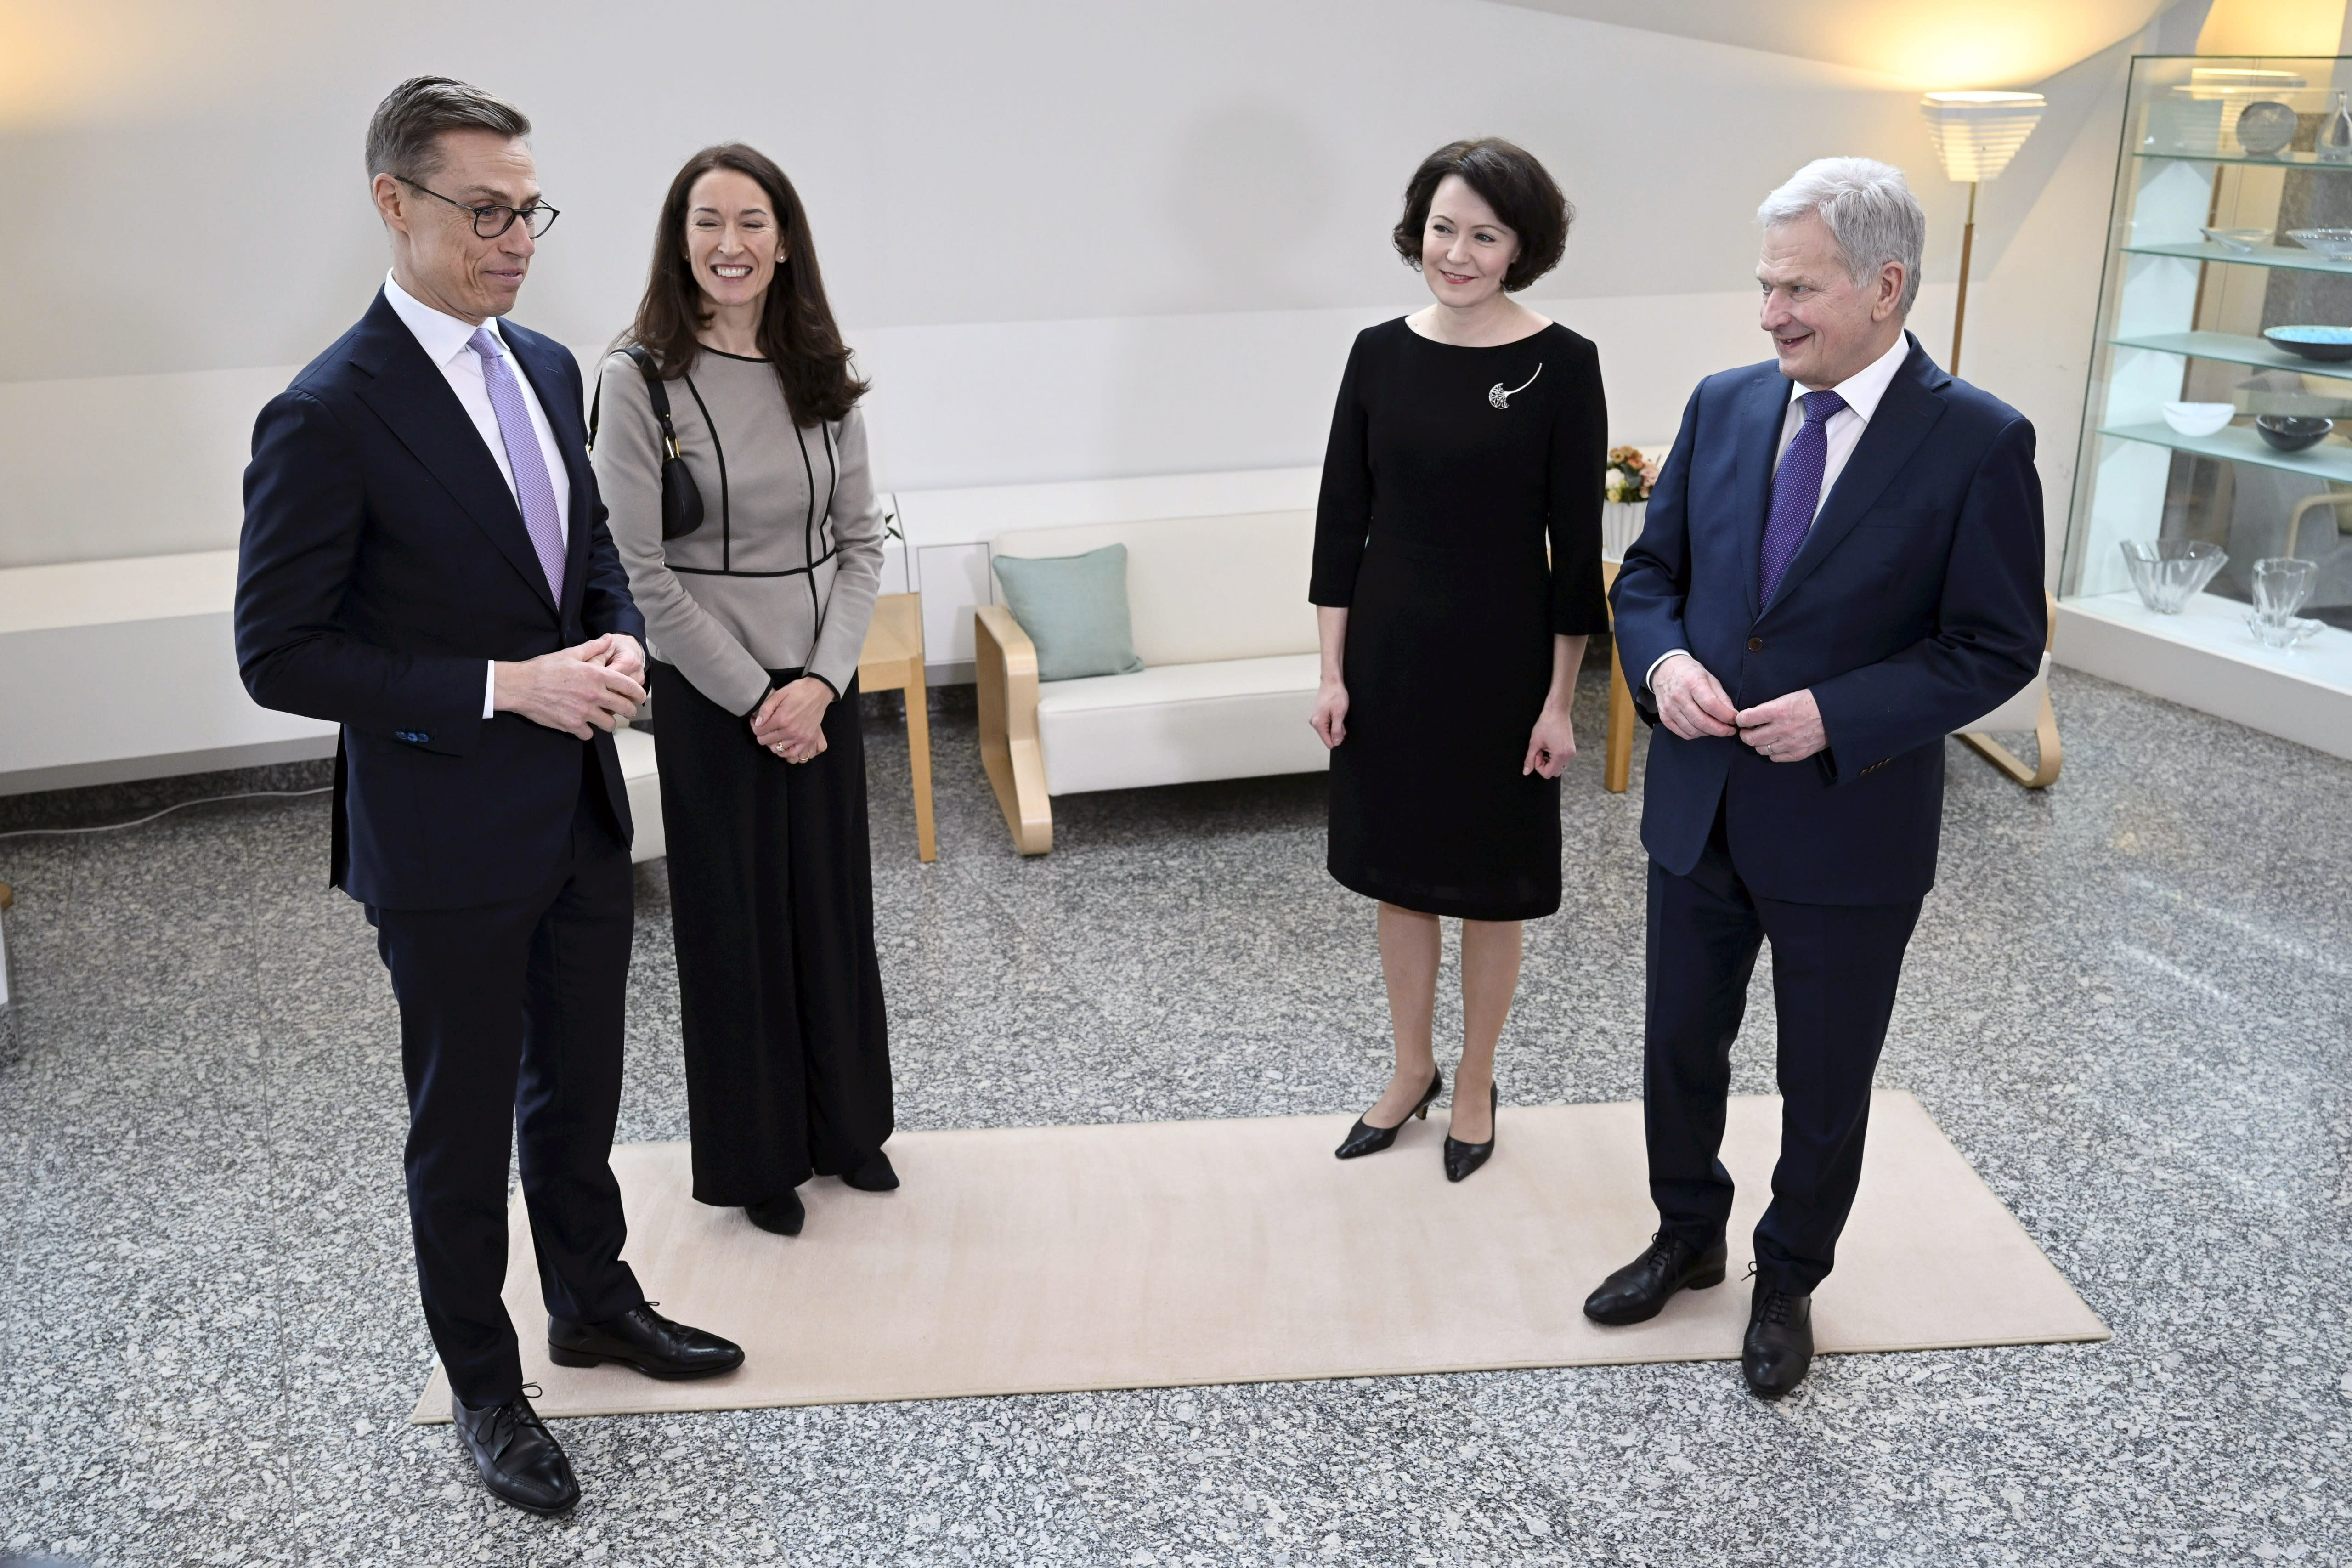 The outgoing and incoming Finnish presidential couples meet at lunch